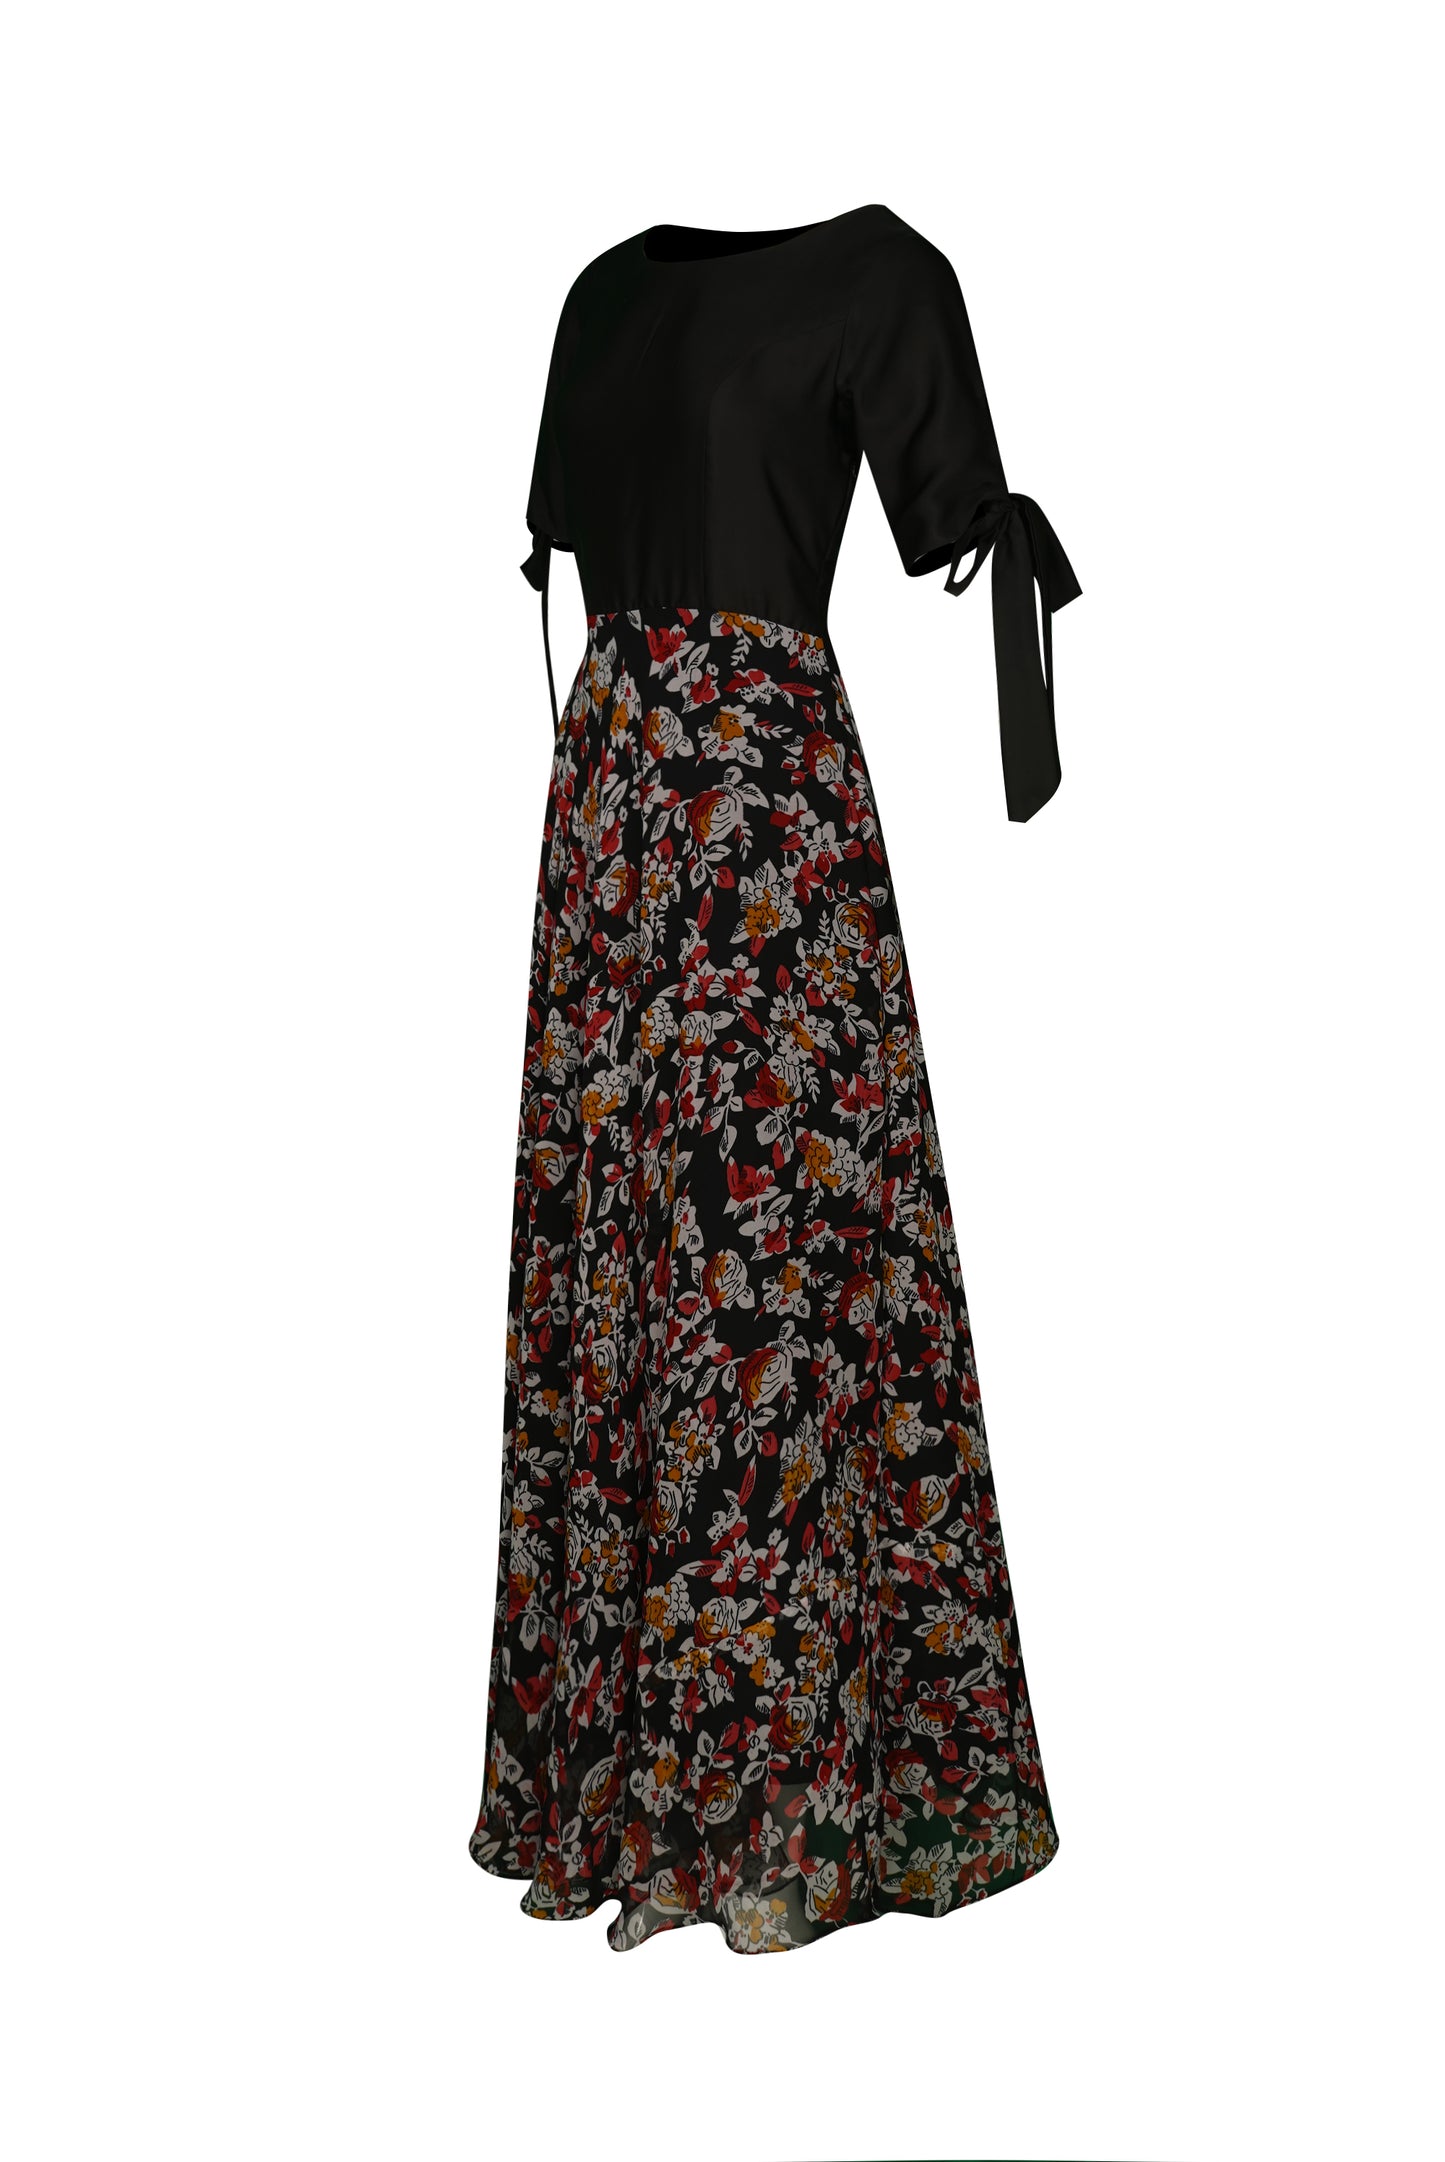 ZIA028 Black and Floral Printed Gown with Tie Sleeves